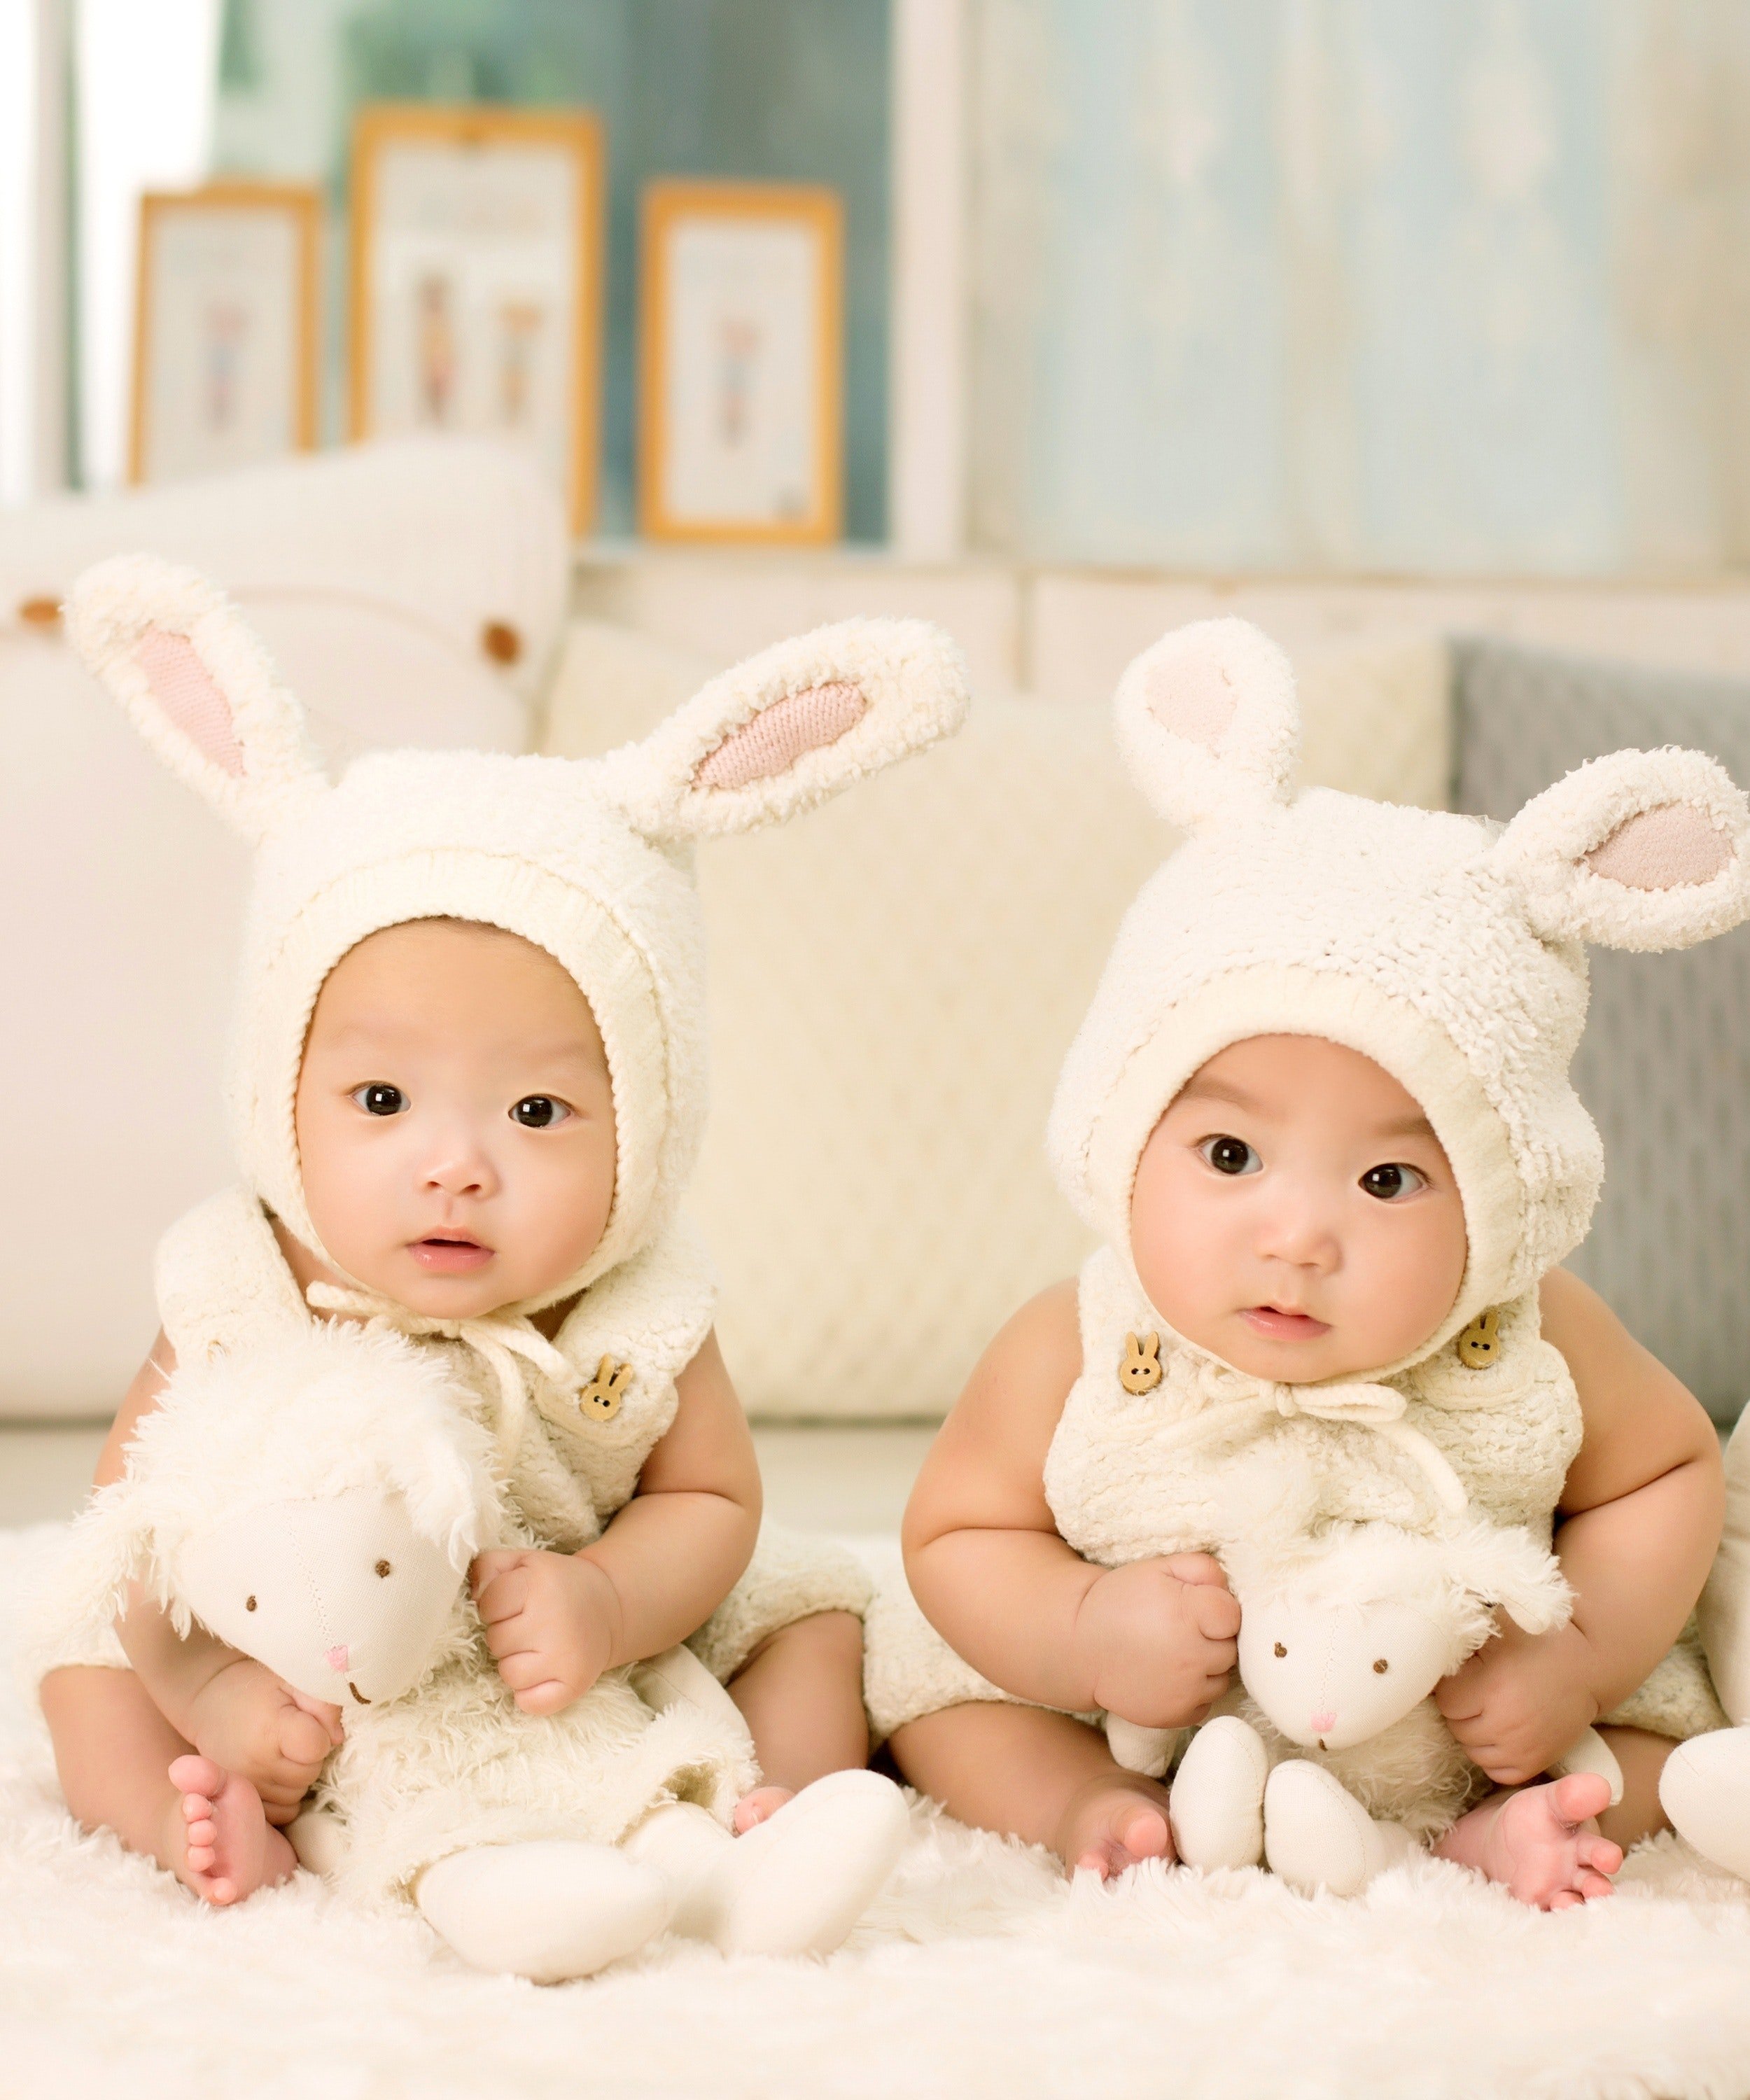 An image of baby twins | Photo: Pexels